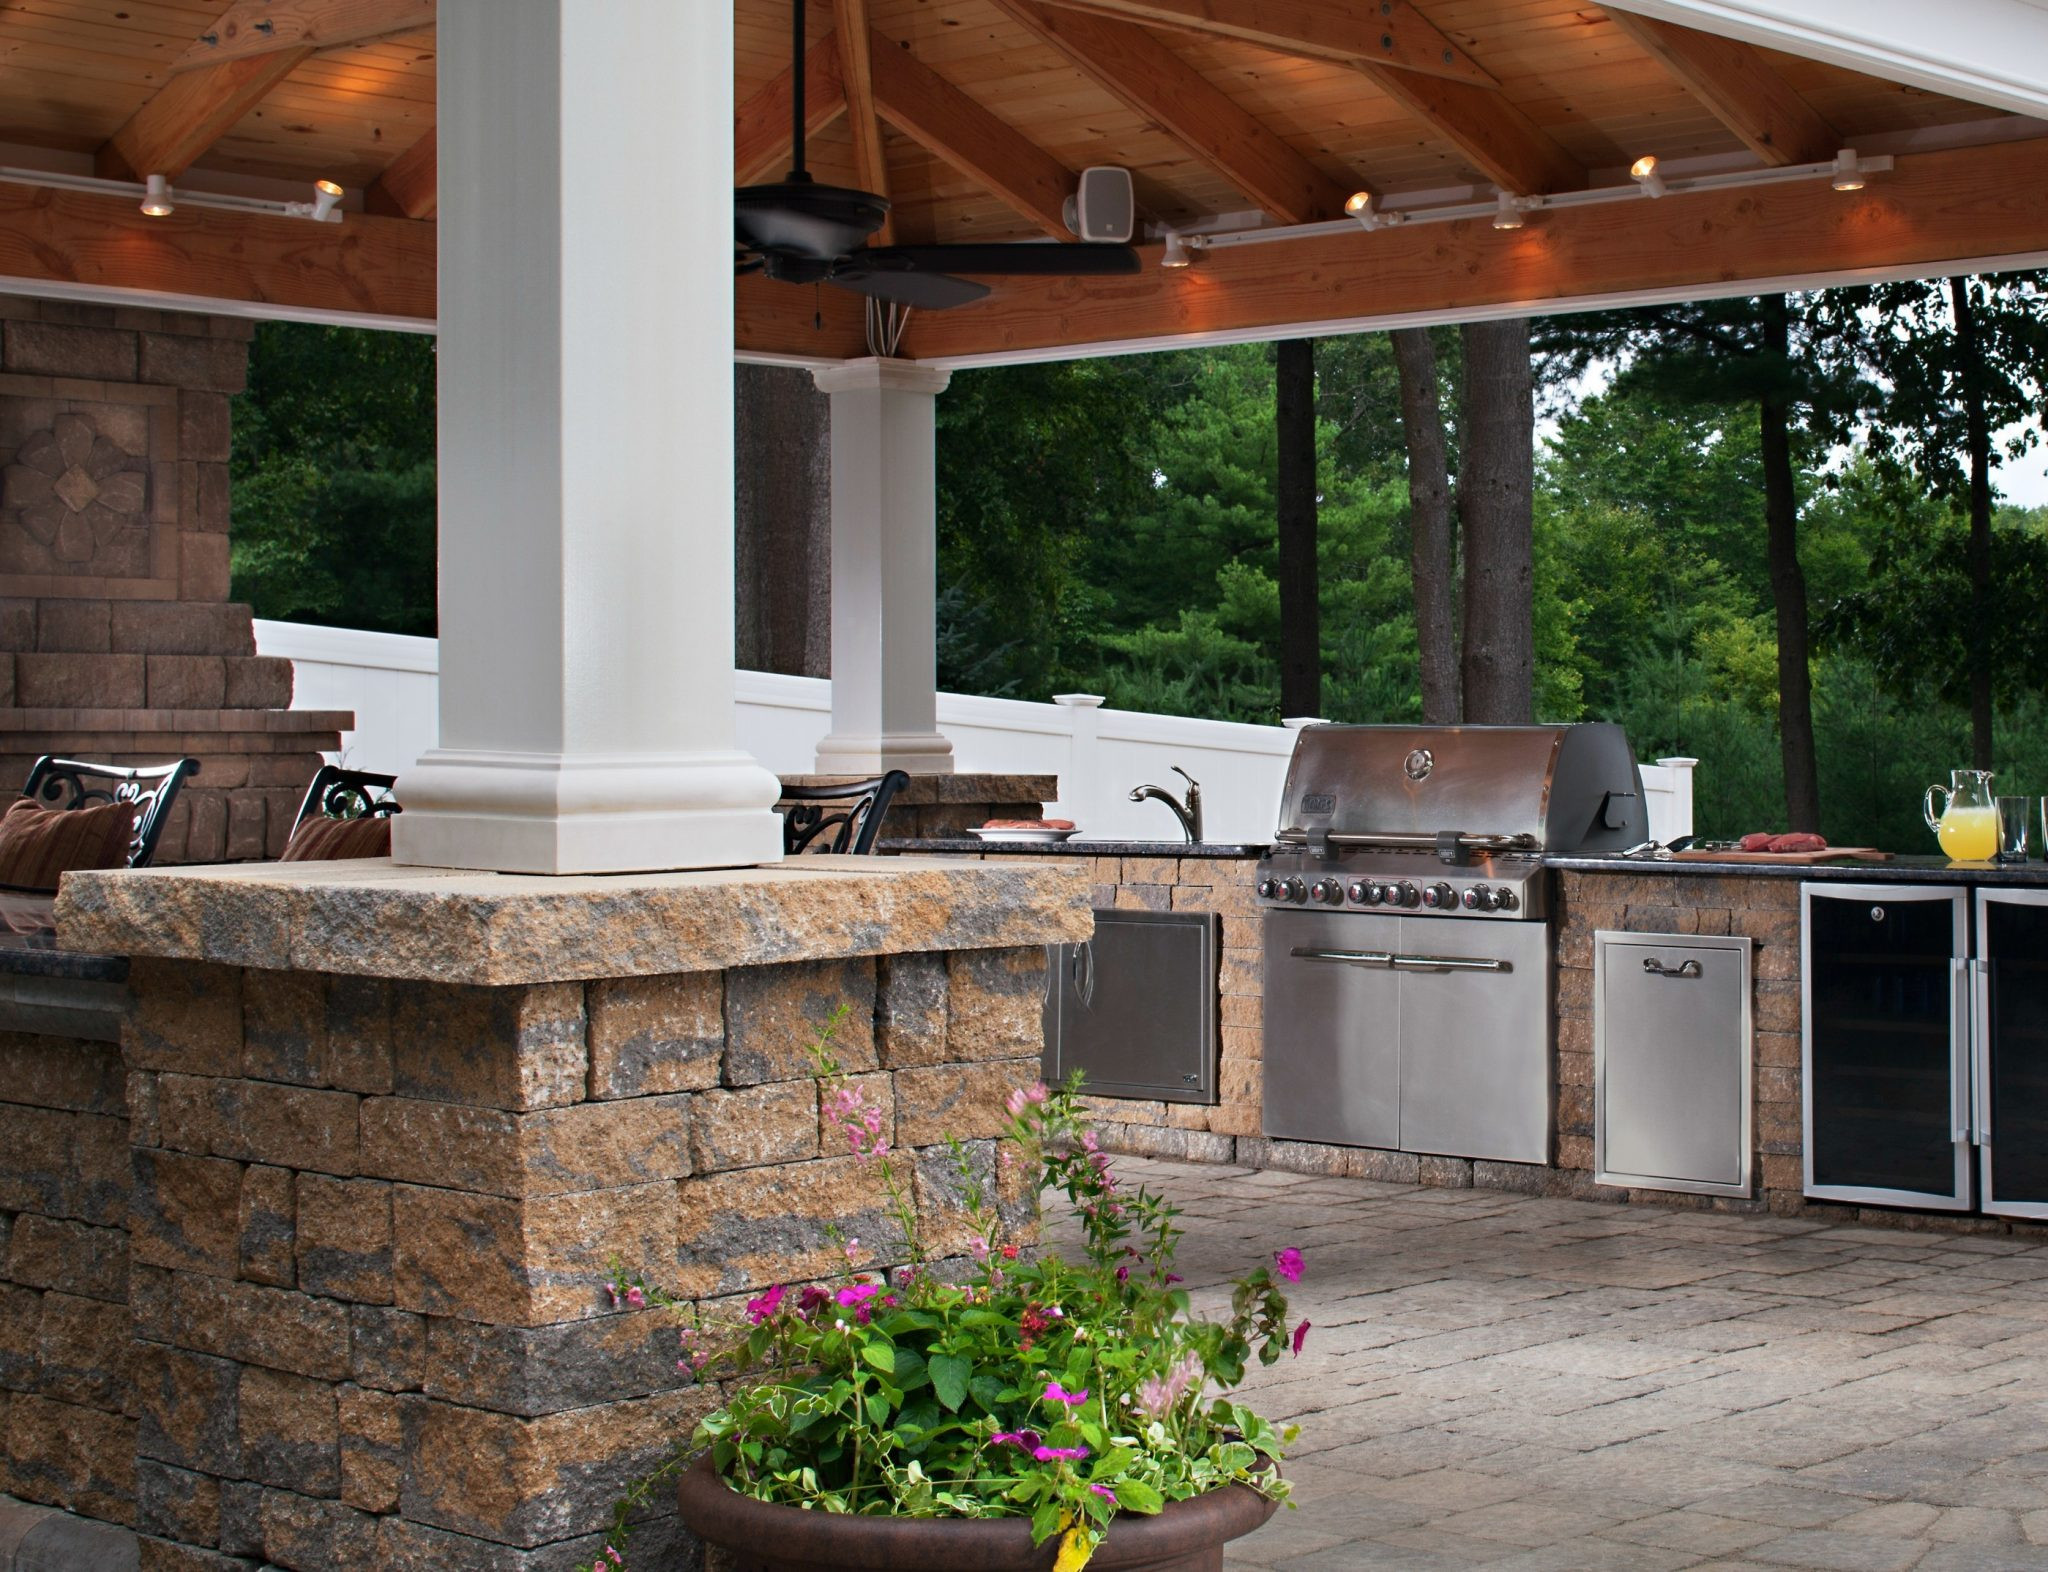 Covered Outdoor Kitchen Plans
 Outdoor Kitchen Trends 9 HOT Ideas For Your Backyard